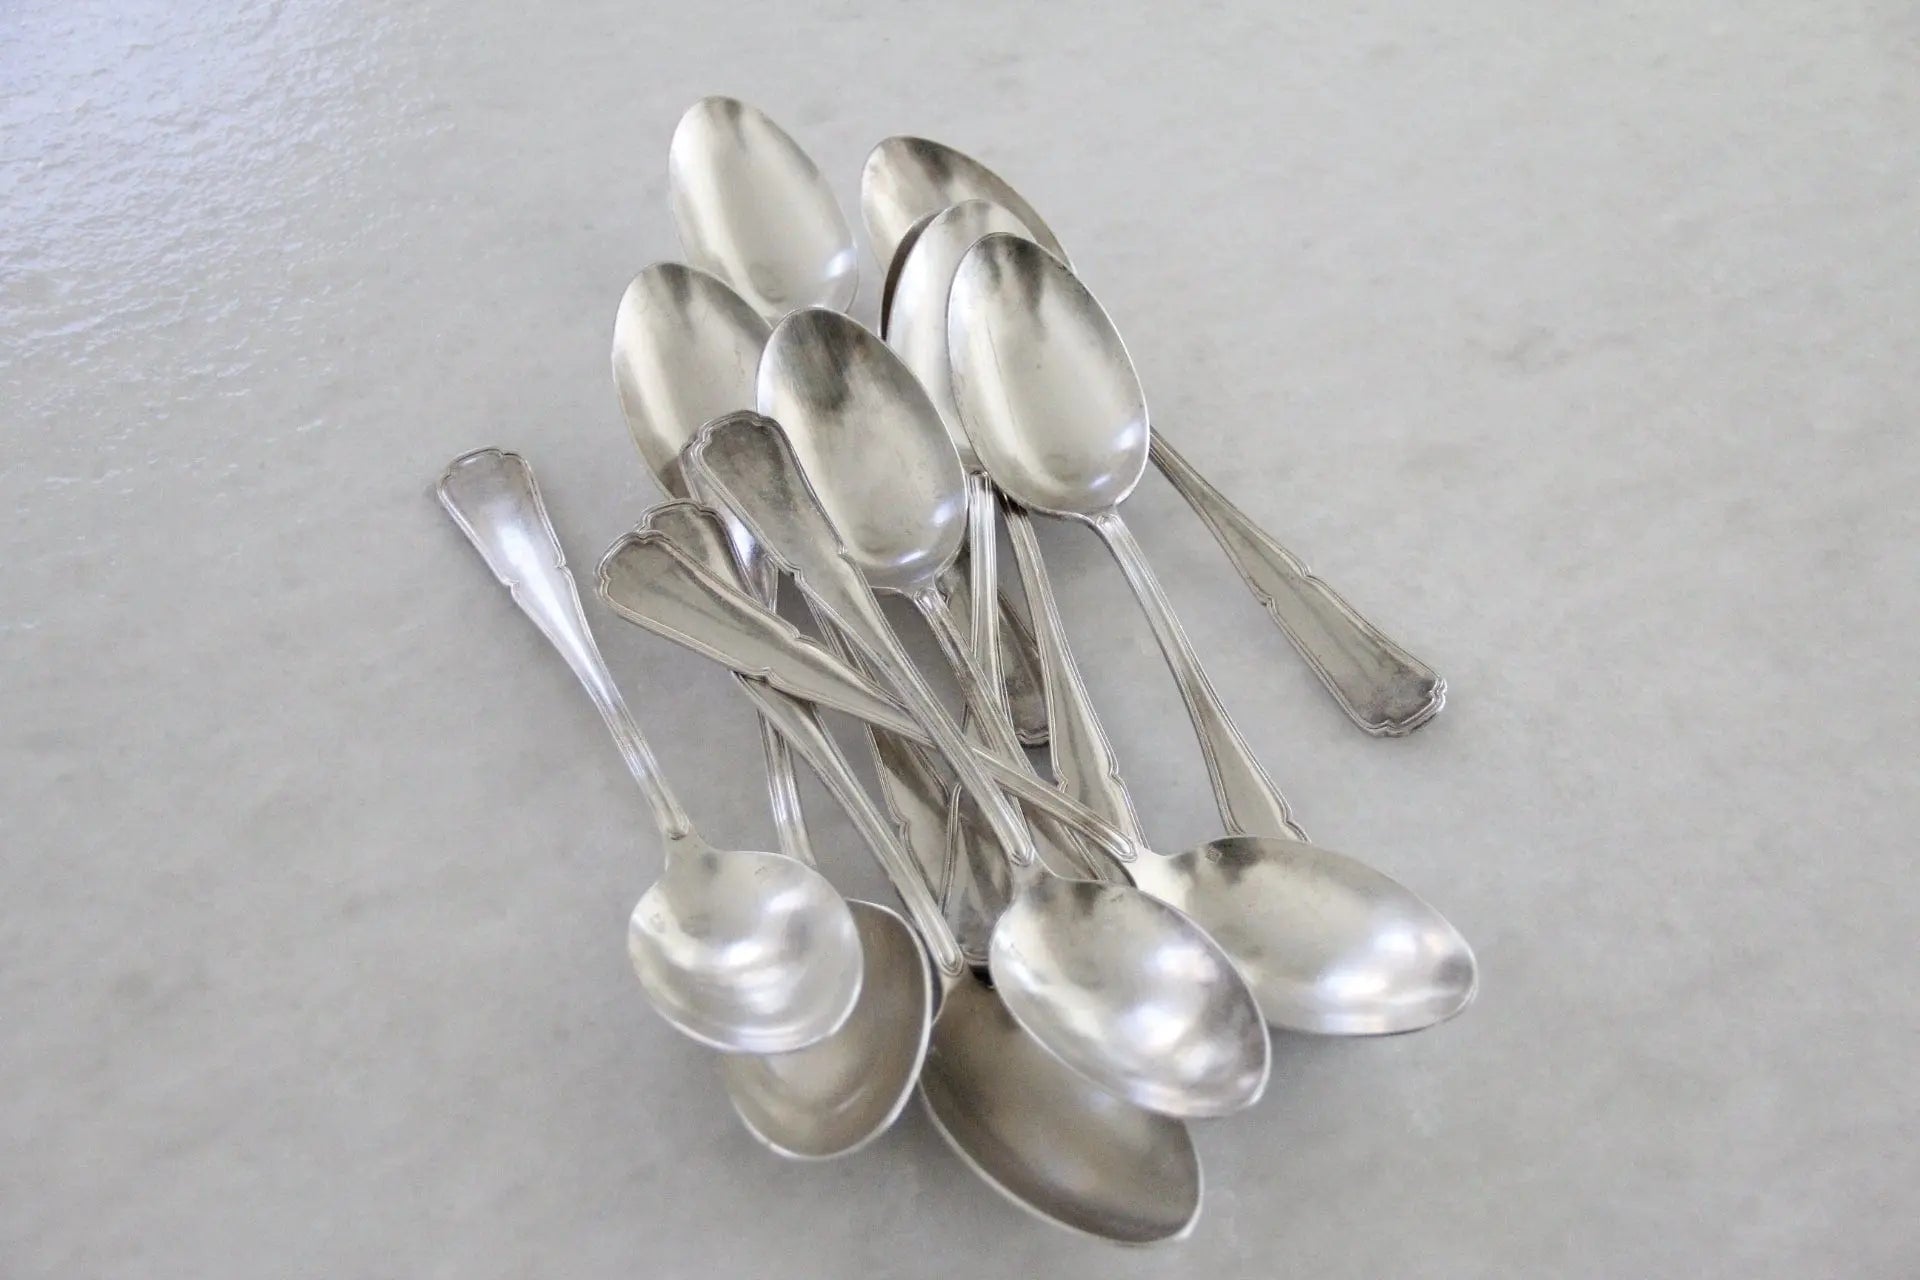 Antique French Silver Tablespoon | Flatware 4 Pcs.  Debra Hall Lifestyle